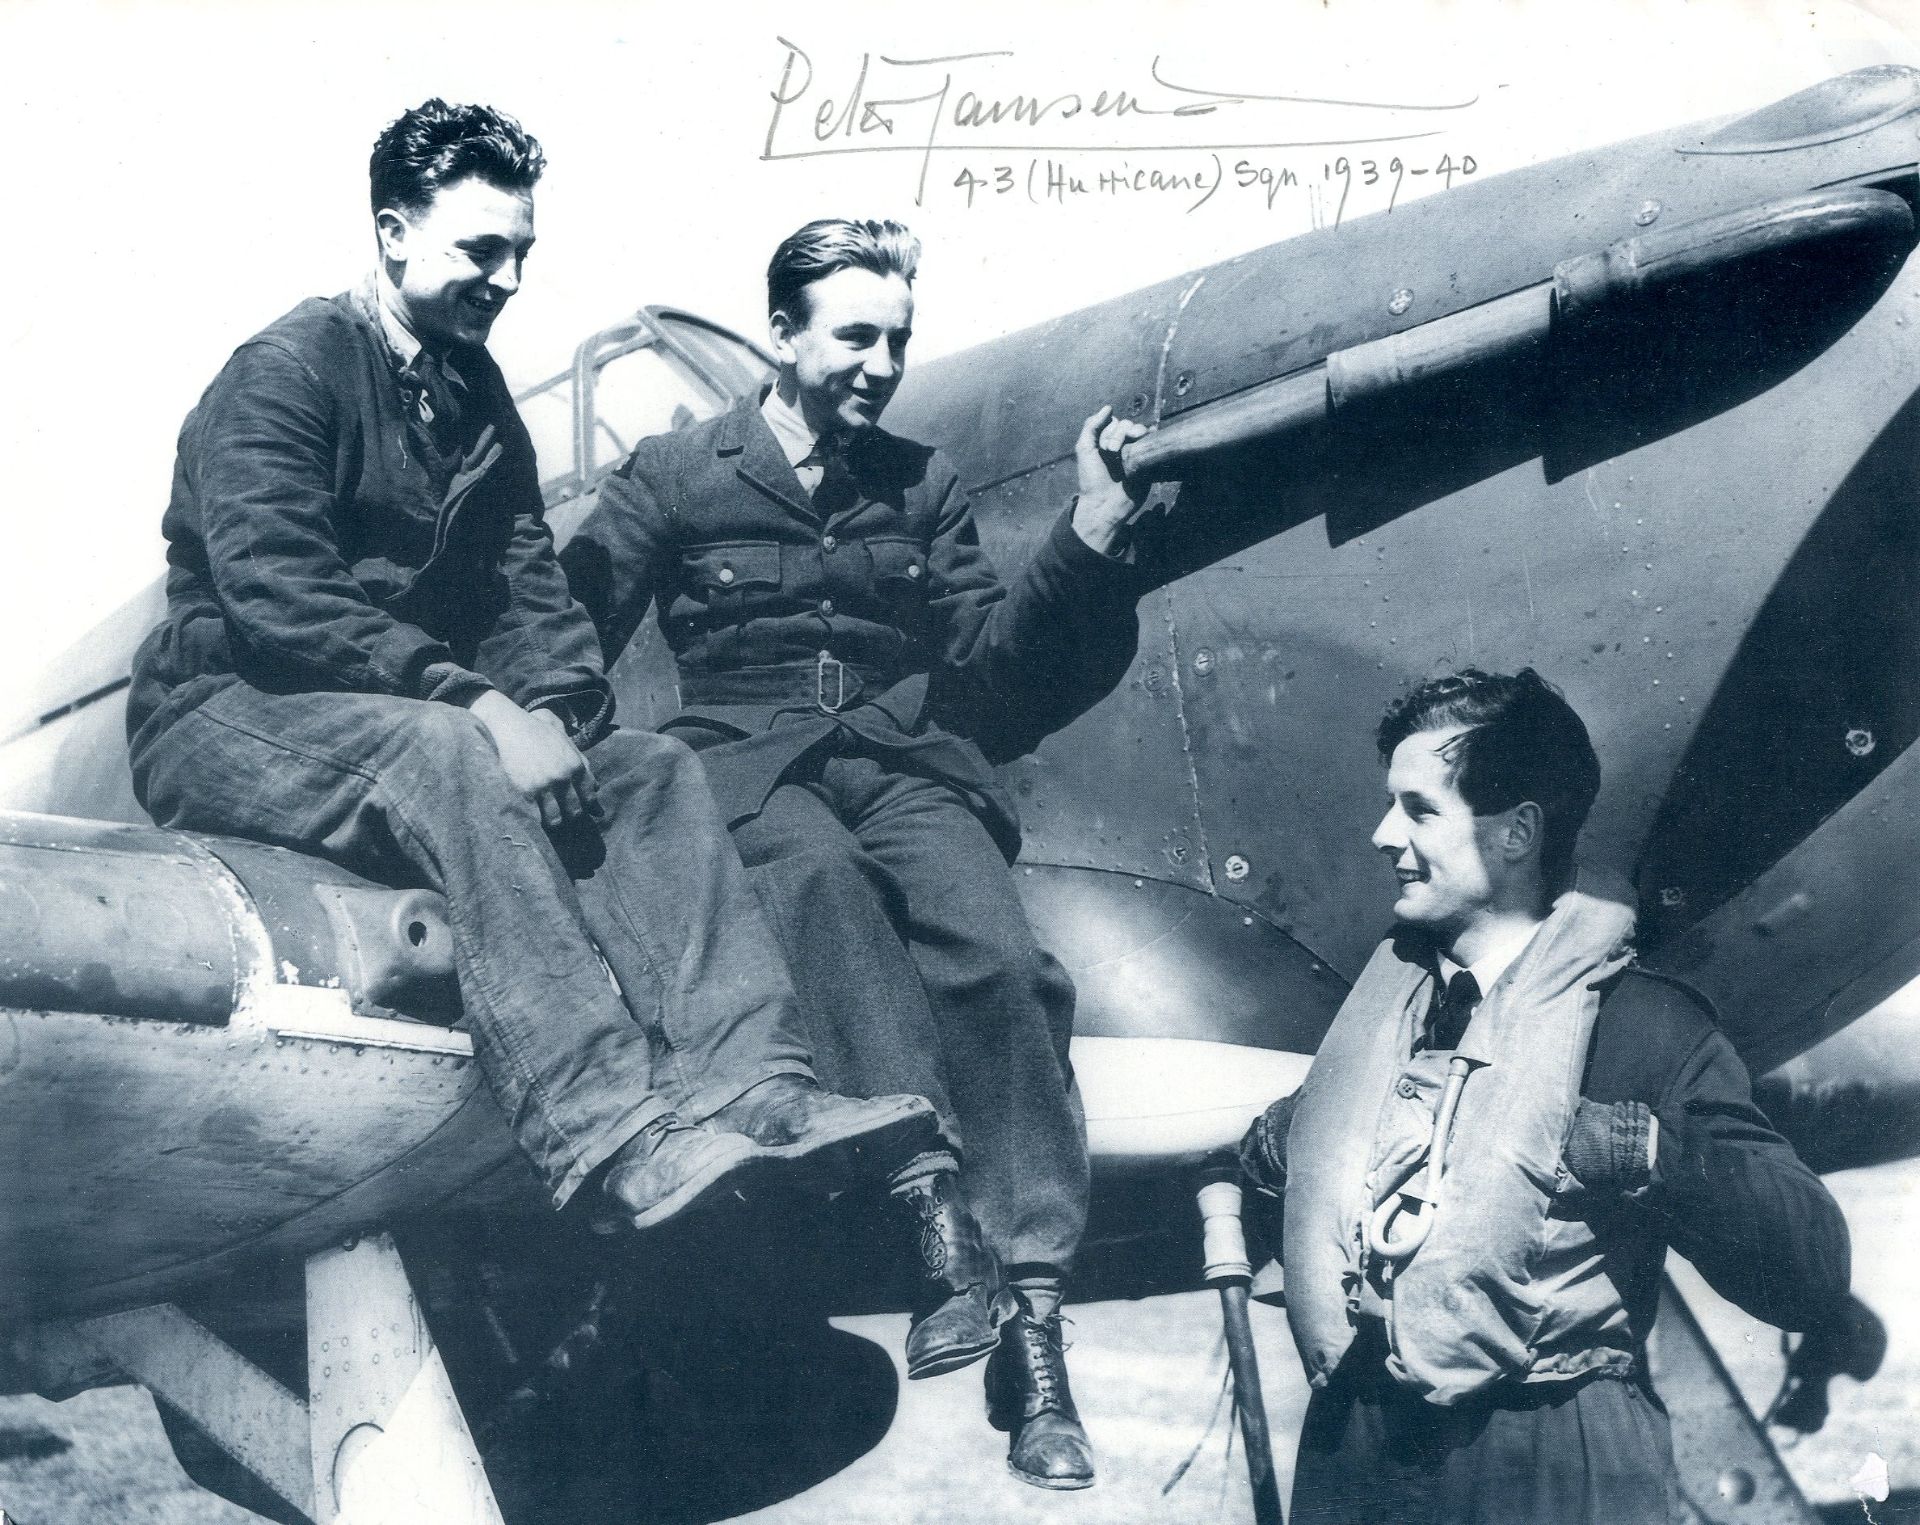 TOWNSEND PETER: (1914-1995) British Group Captain and flying ace of World War II who participated - Image 3 of 8